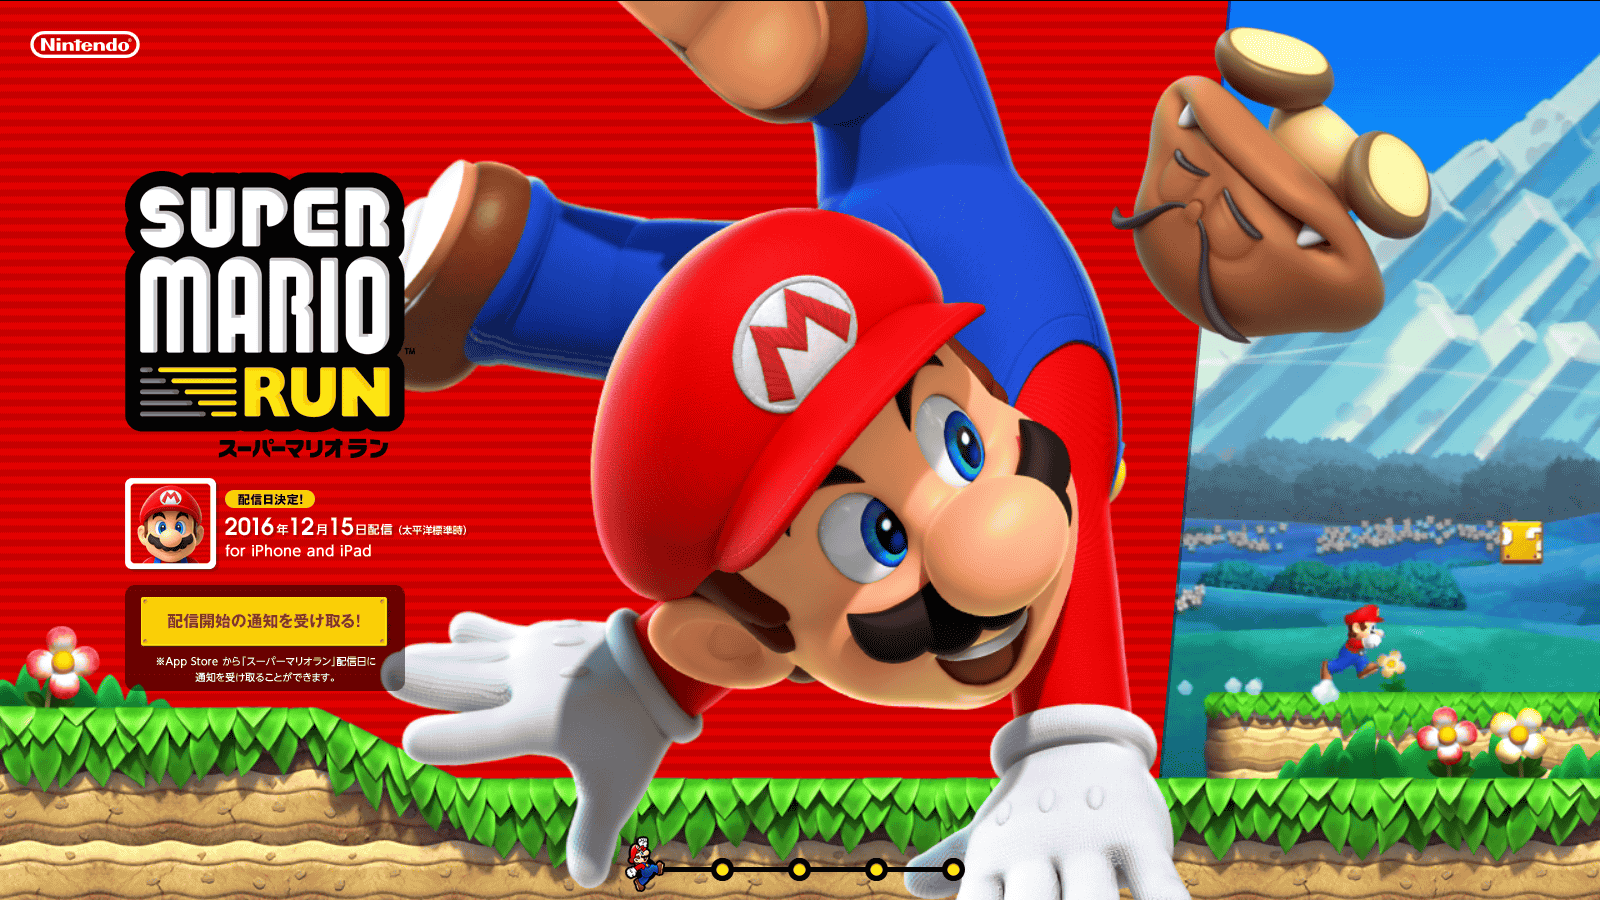 Super Mario Run Super Mario Run Starts Distribution Price Determination For Ios Version On December 15 And Also Releases A New Play Movie Gigazine